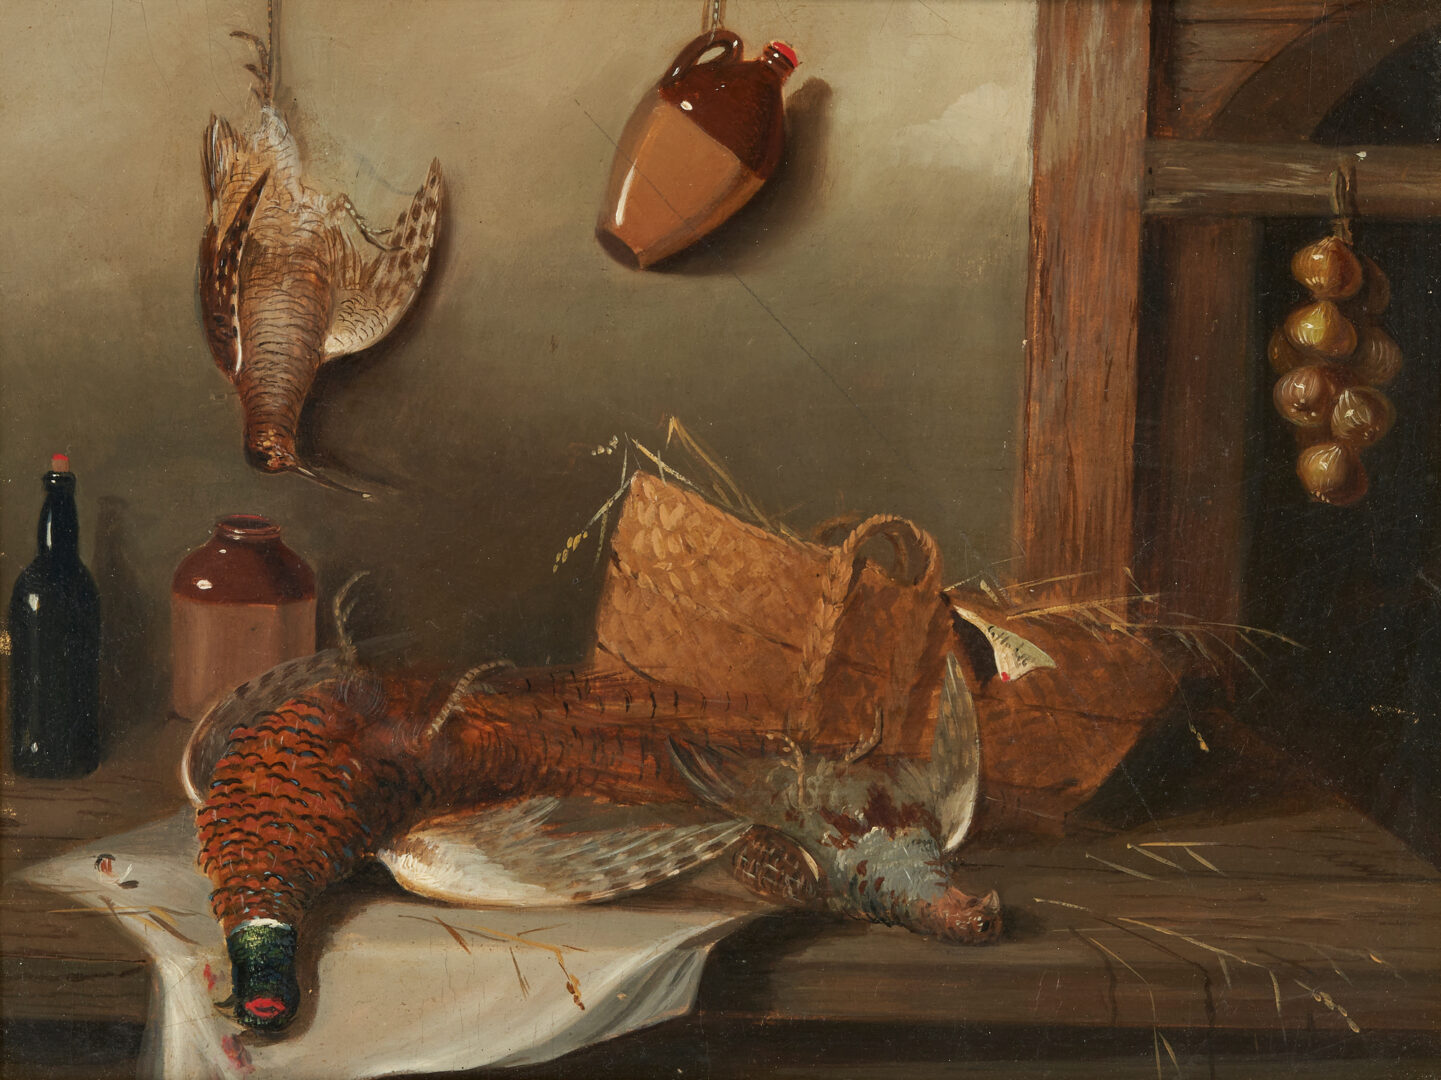 Lot 1067: Nature Morte or Still Life Painting with Game and Wine, O/B